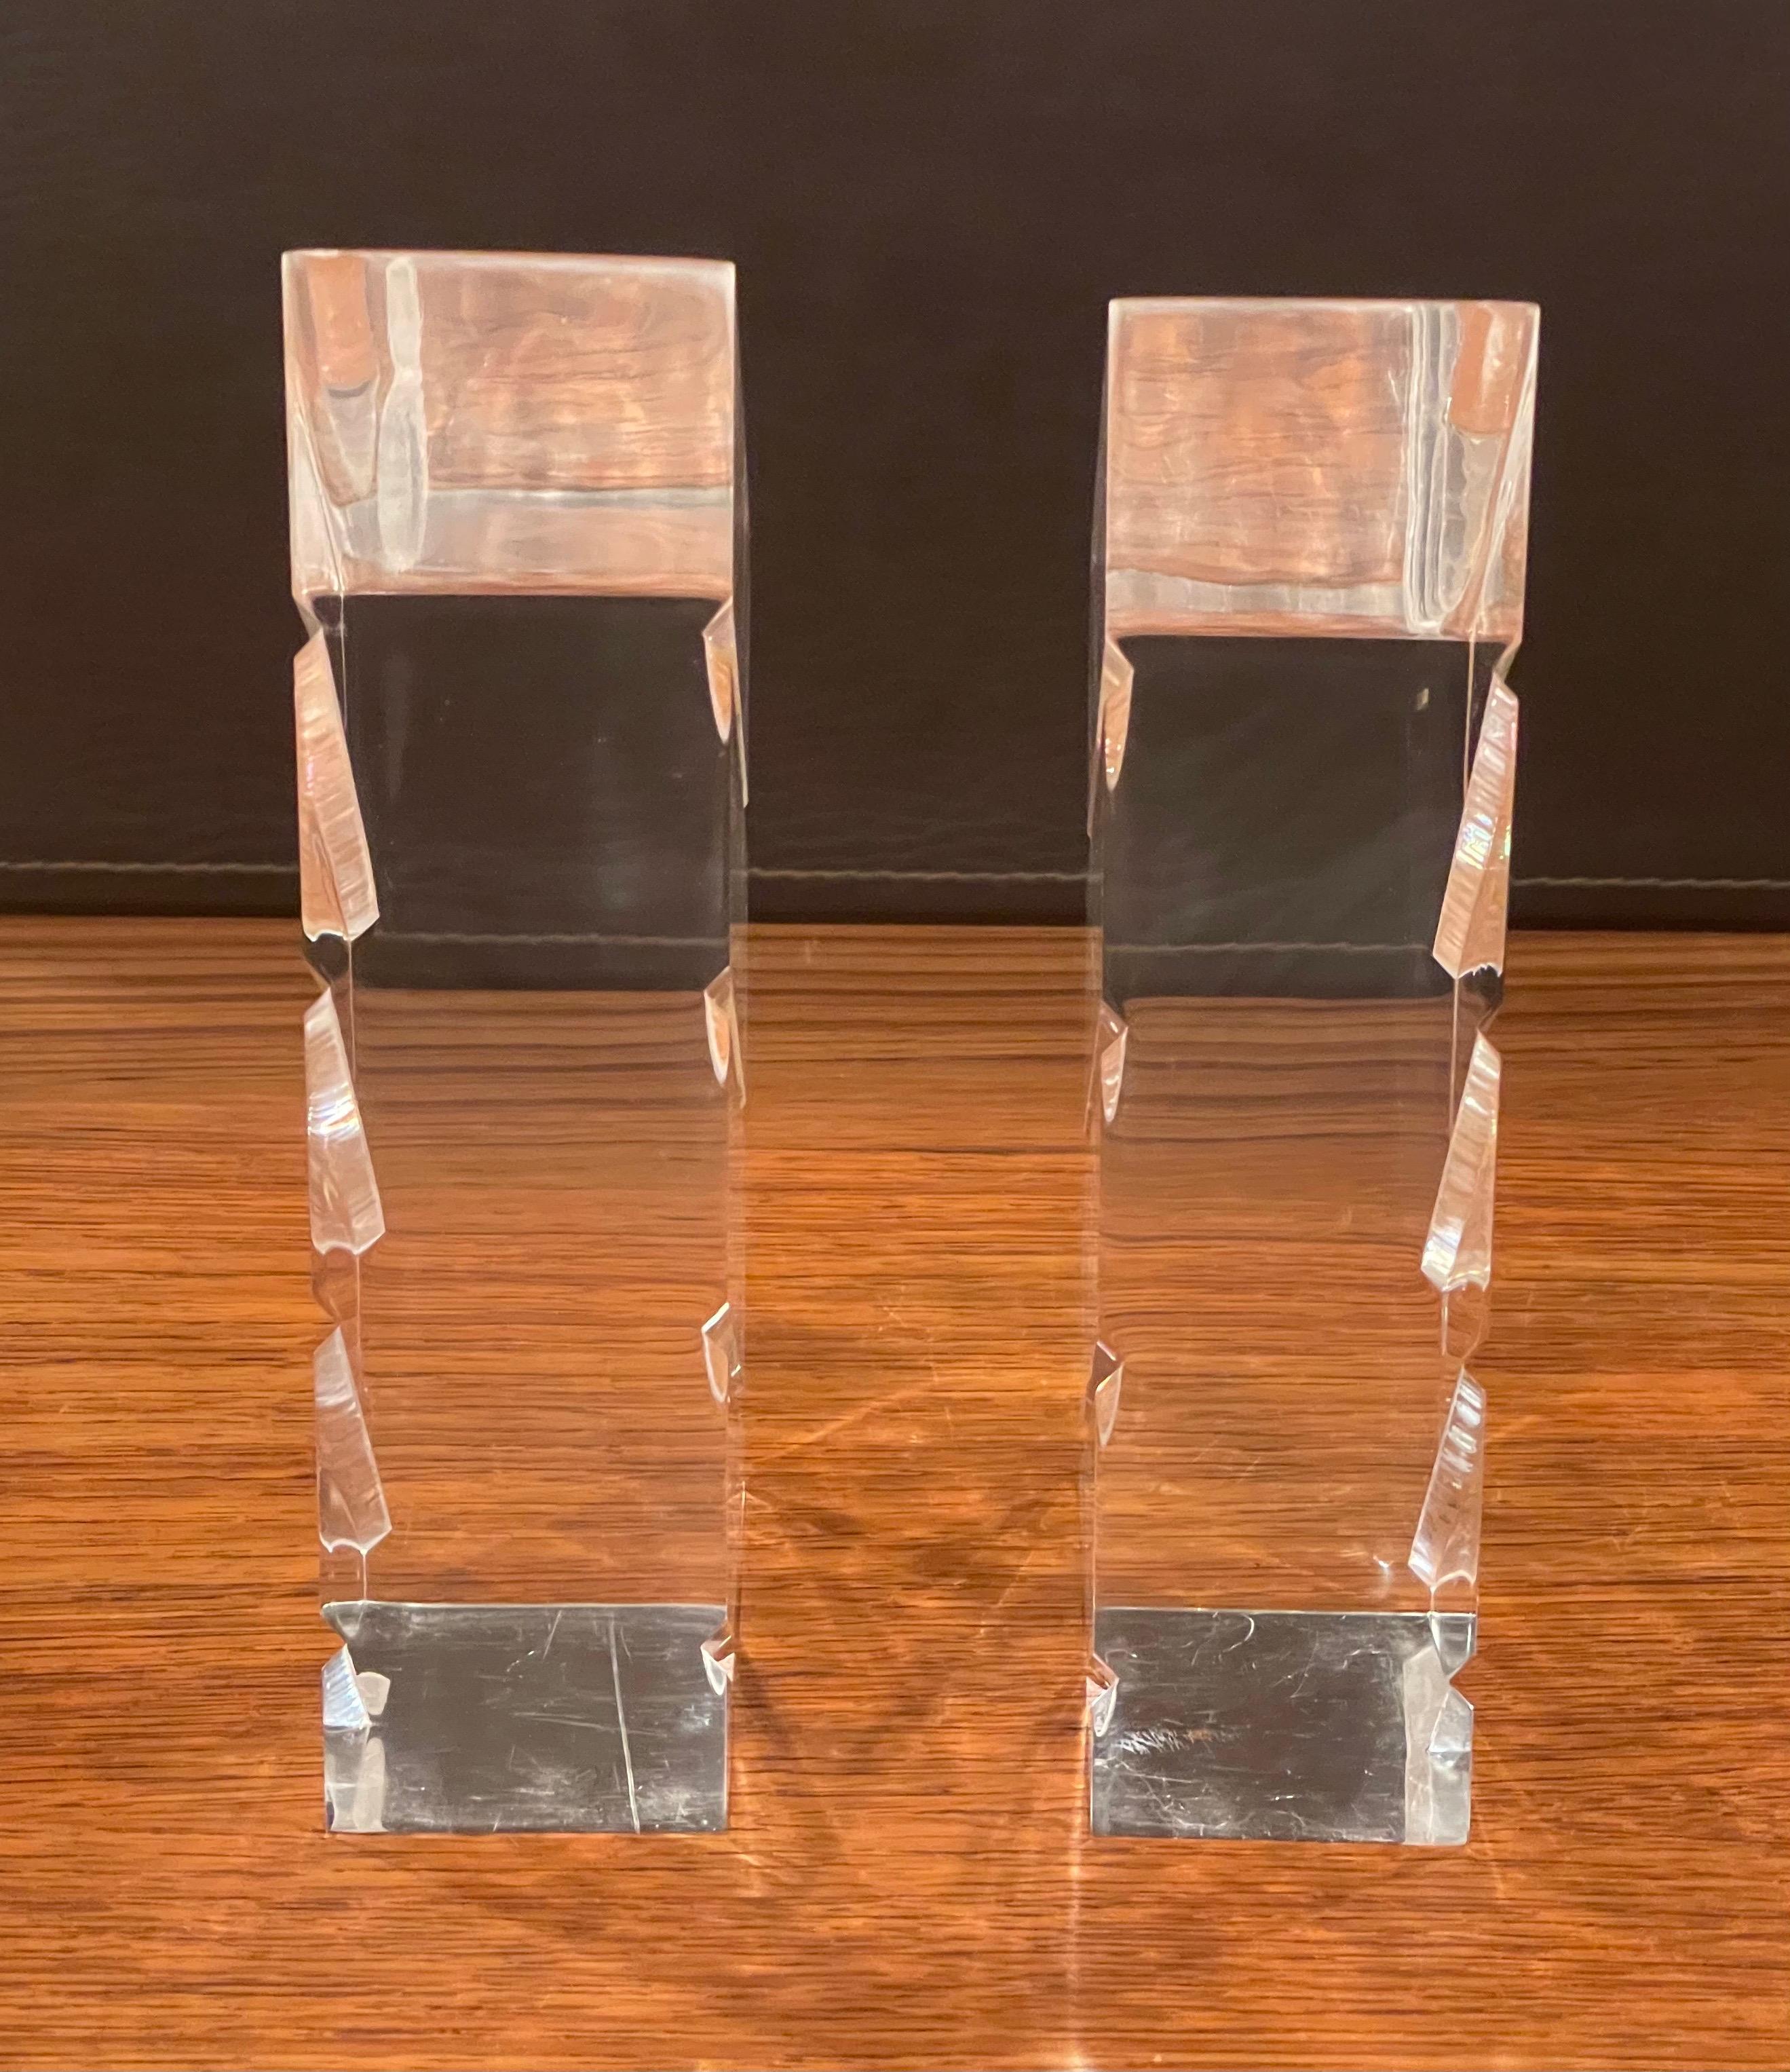 Pair of Midcentury Lucite Bookends by Herb Ritts for Astrolite In Good Condition For Sale In San Diego, CA